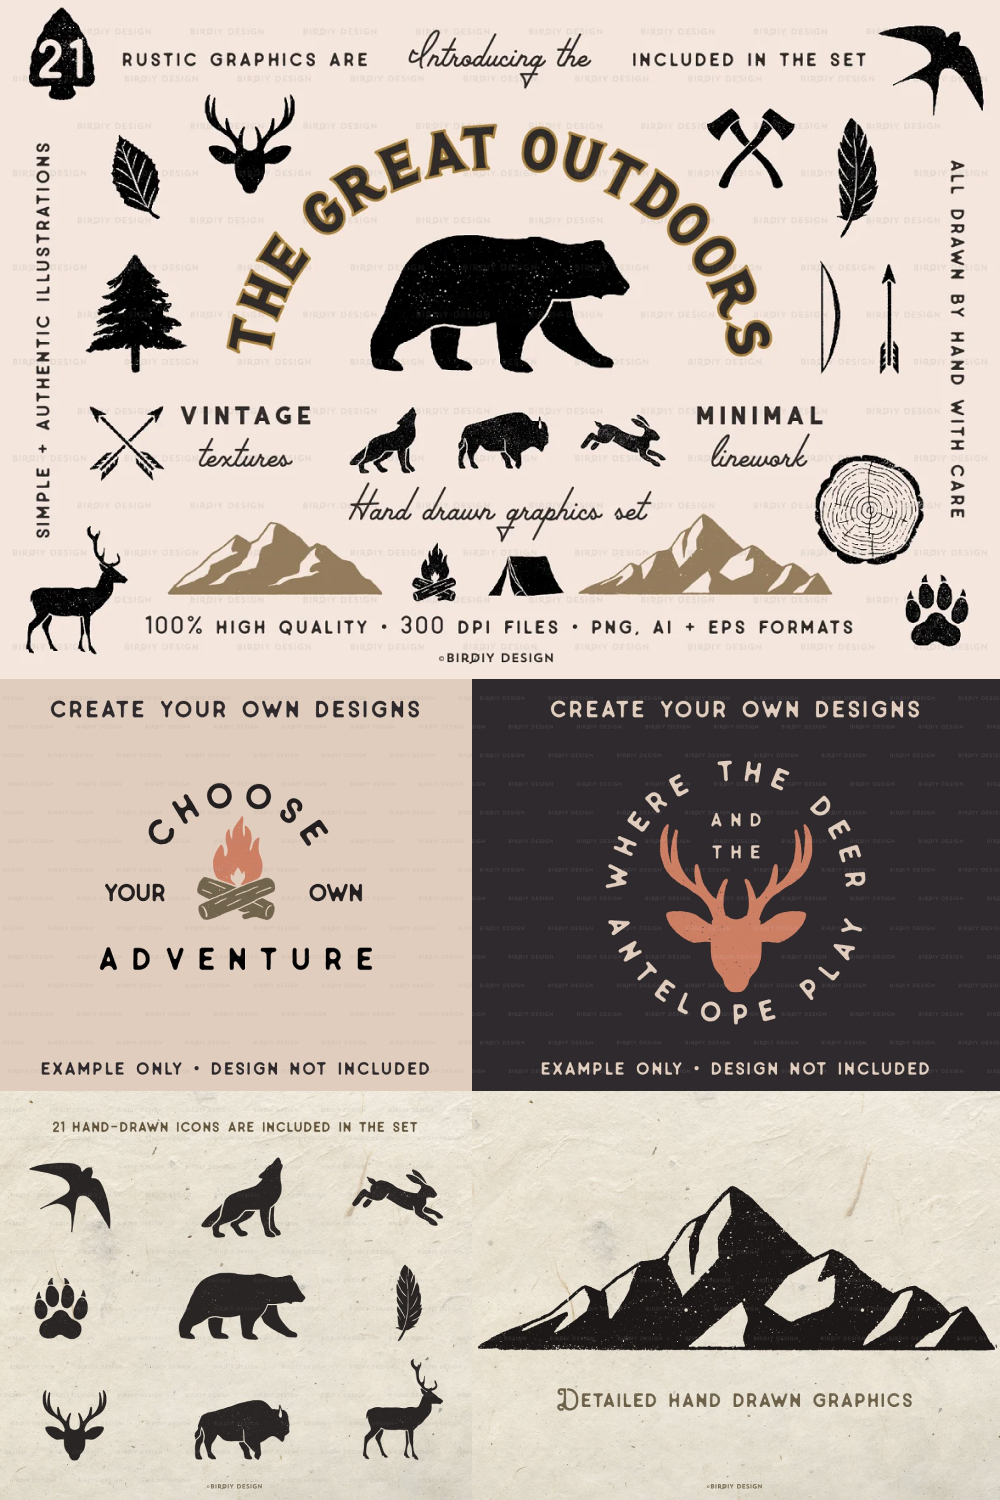 Illustrations rustic nature icons illustrations of pinterest.